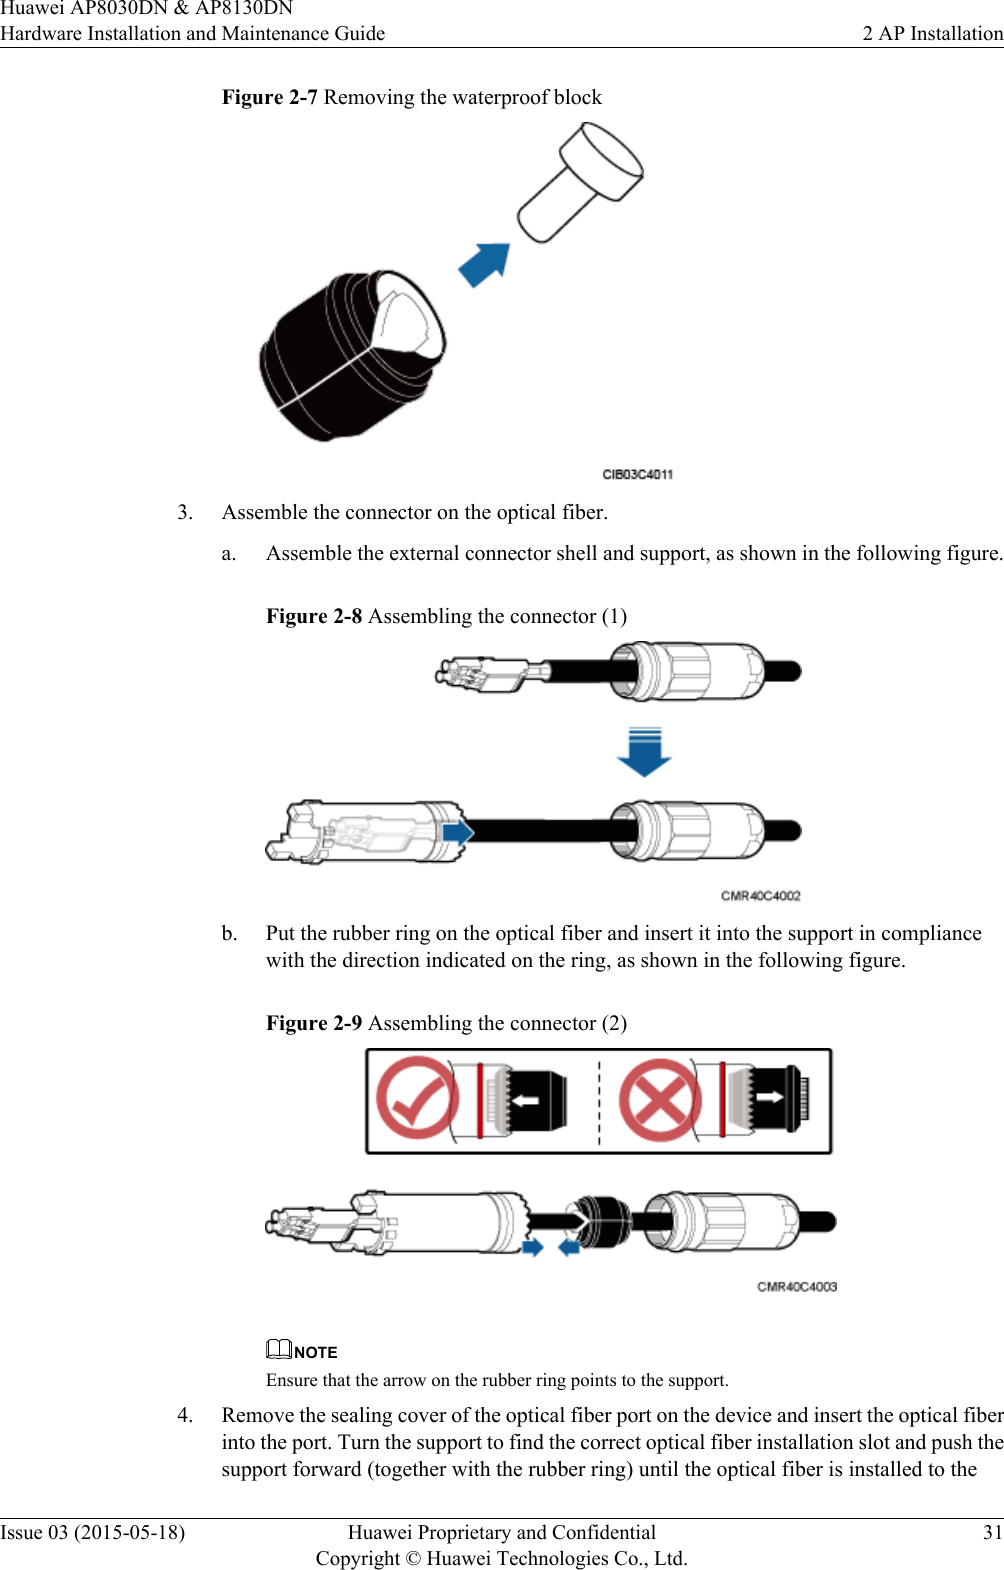 Figure 2-7 Removing the waterproof block3. Assemble the connector on the optical fiber.a. Assemble the external connector shell and support, as shown in the following figure.Figure 2-8 Assembling the connector (1)b. Put the rubber ring on the optical fiber and insert it into the support in compliancewith the direction indicated on the ring, as shown in the following figure.Figure 2-9 Assembling the connector (2)NOTEEnsure that the arrow on the rubber ring points to the support.4. Remove the sealing cover of the optical fiber port on the device and insert the optical fiberinto the port. Turn the support to find the correct optical fiber installation slot and push thesupport forward (together with the rubber ring) until the optical fiber is installed to theHuawei AP8030DN &amp; AP8130DNHardware Installation and Maintenance Guide 2 AP InstallationIssue 03 (2015-05-18) Huawei Proprietary and ConfidentialCopyright © Huawei Technologies Co., Ltd.31